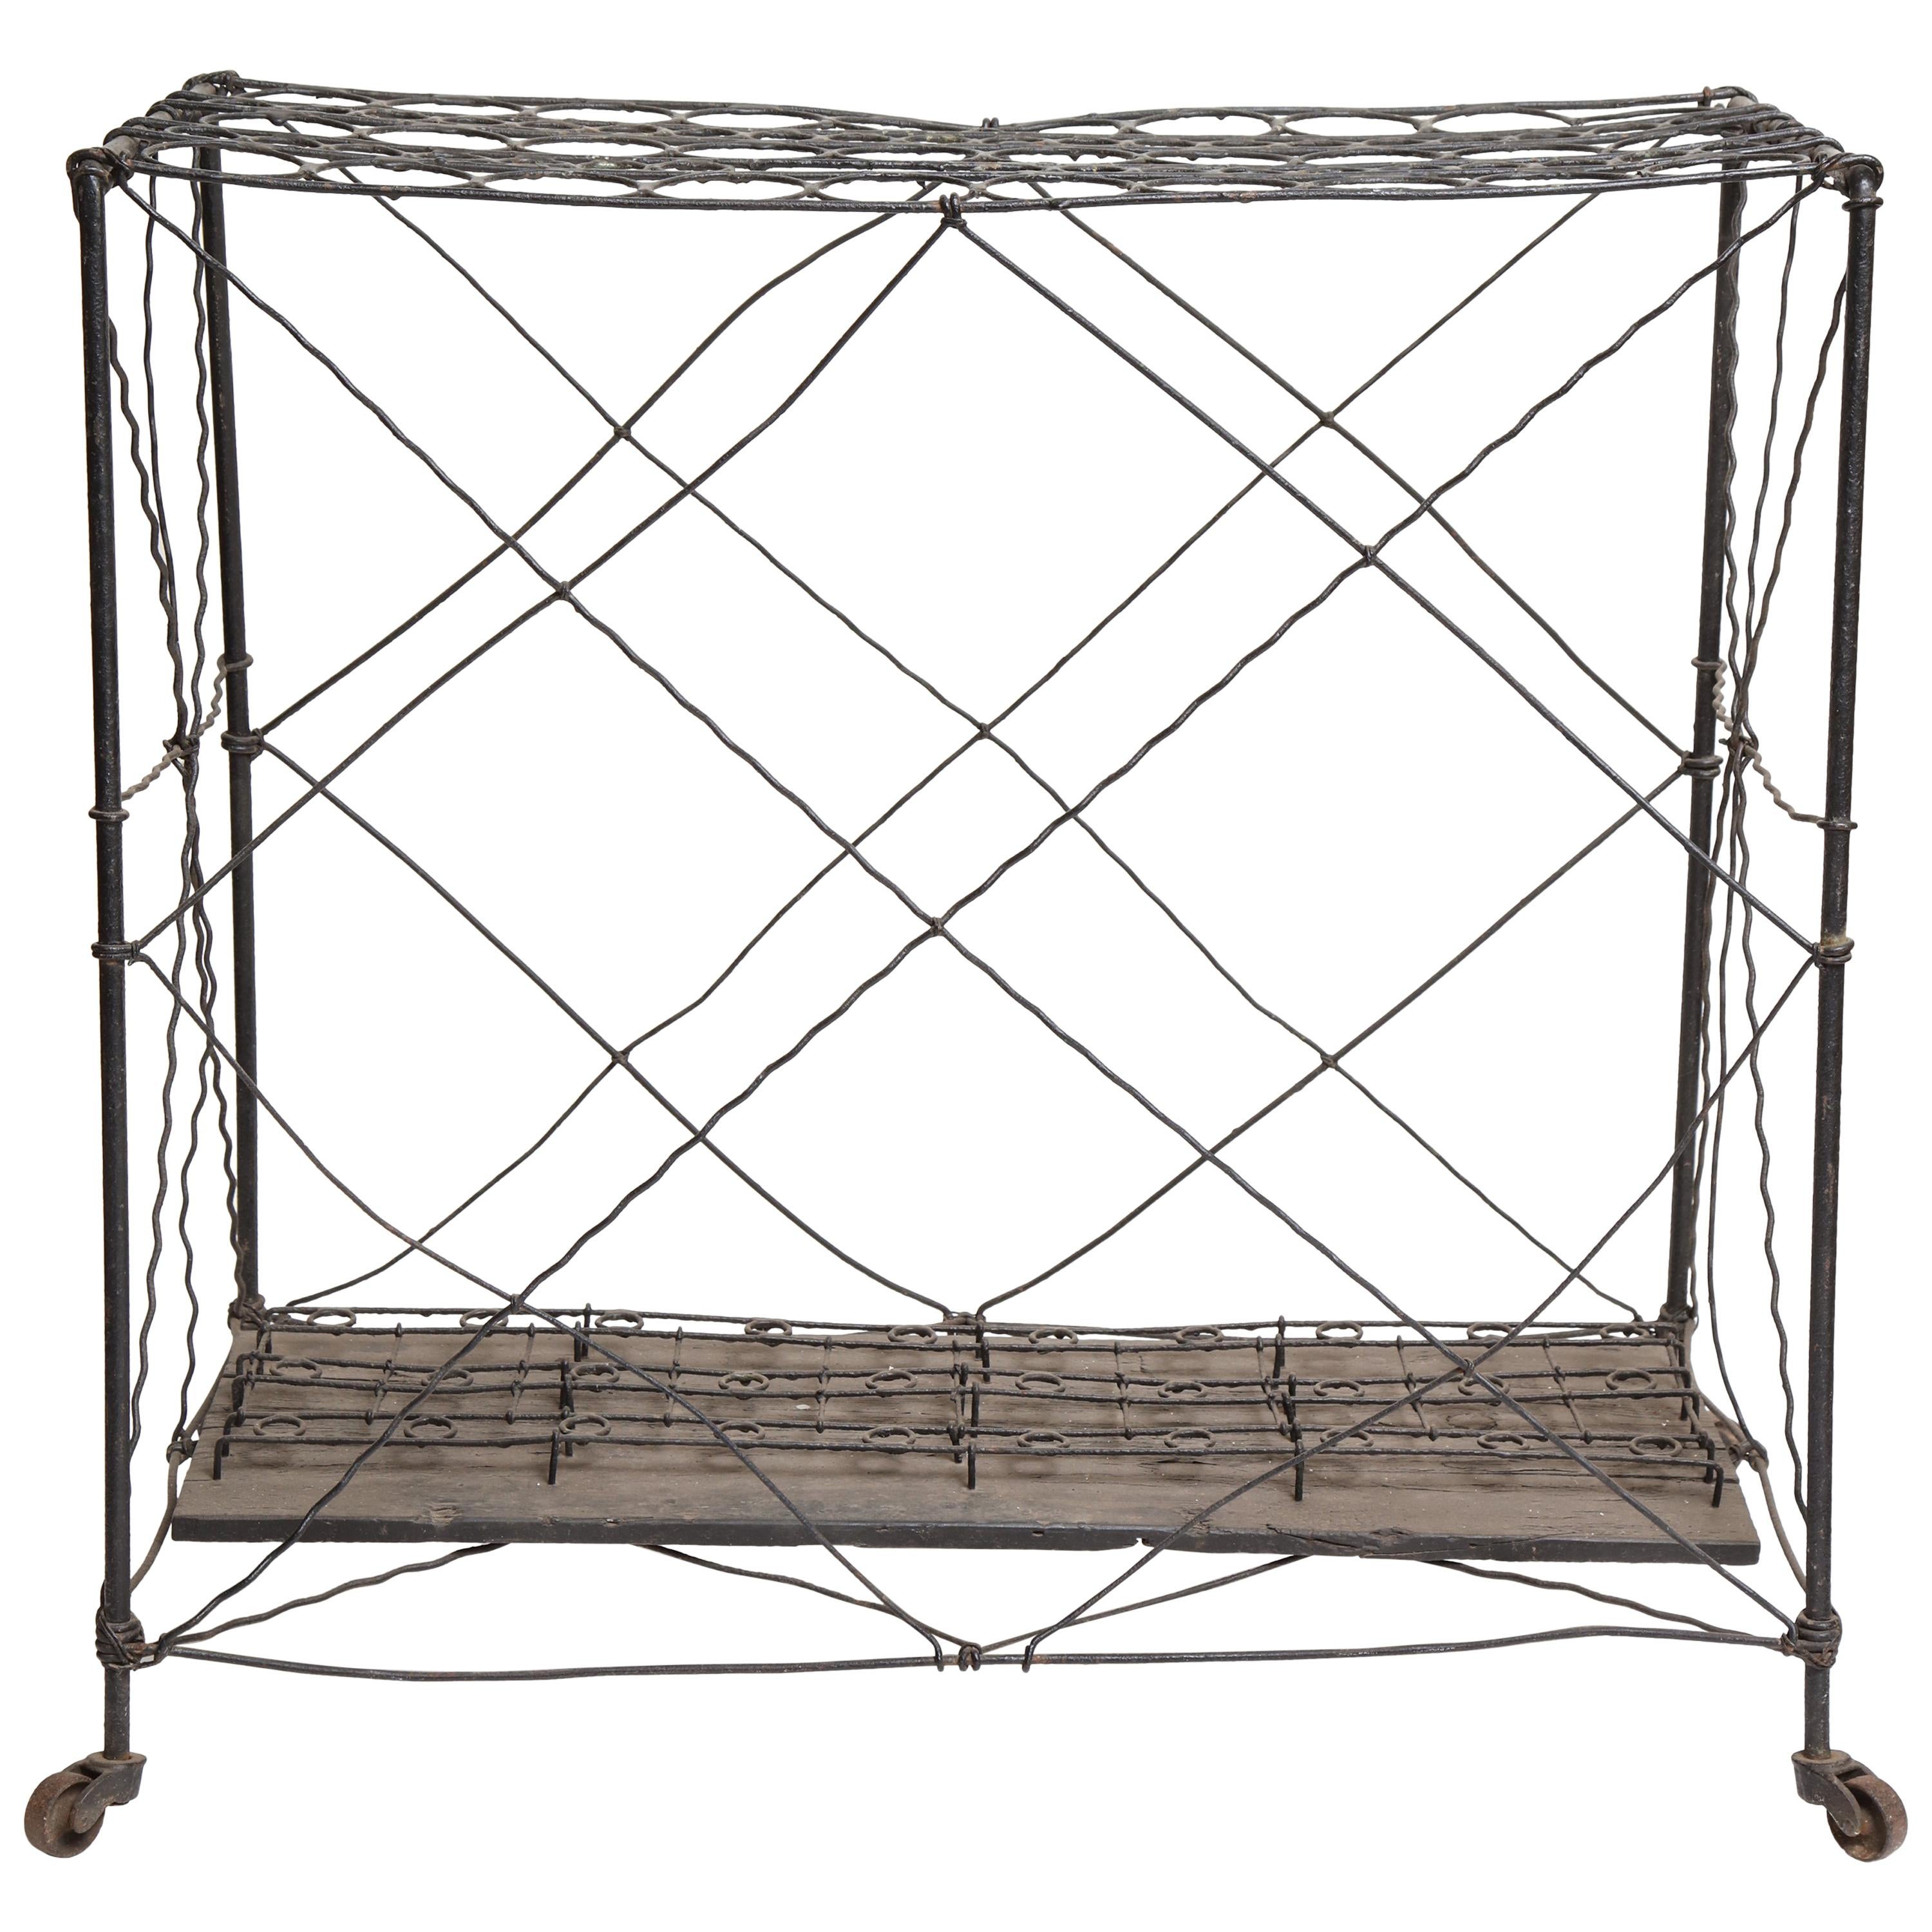 Late 19th Century, Wire Cane Stand